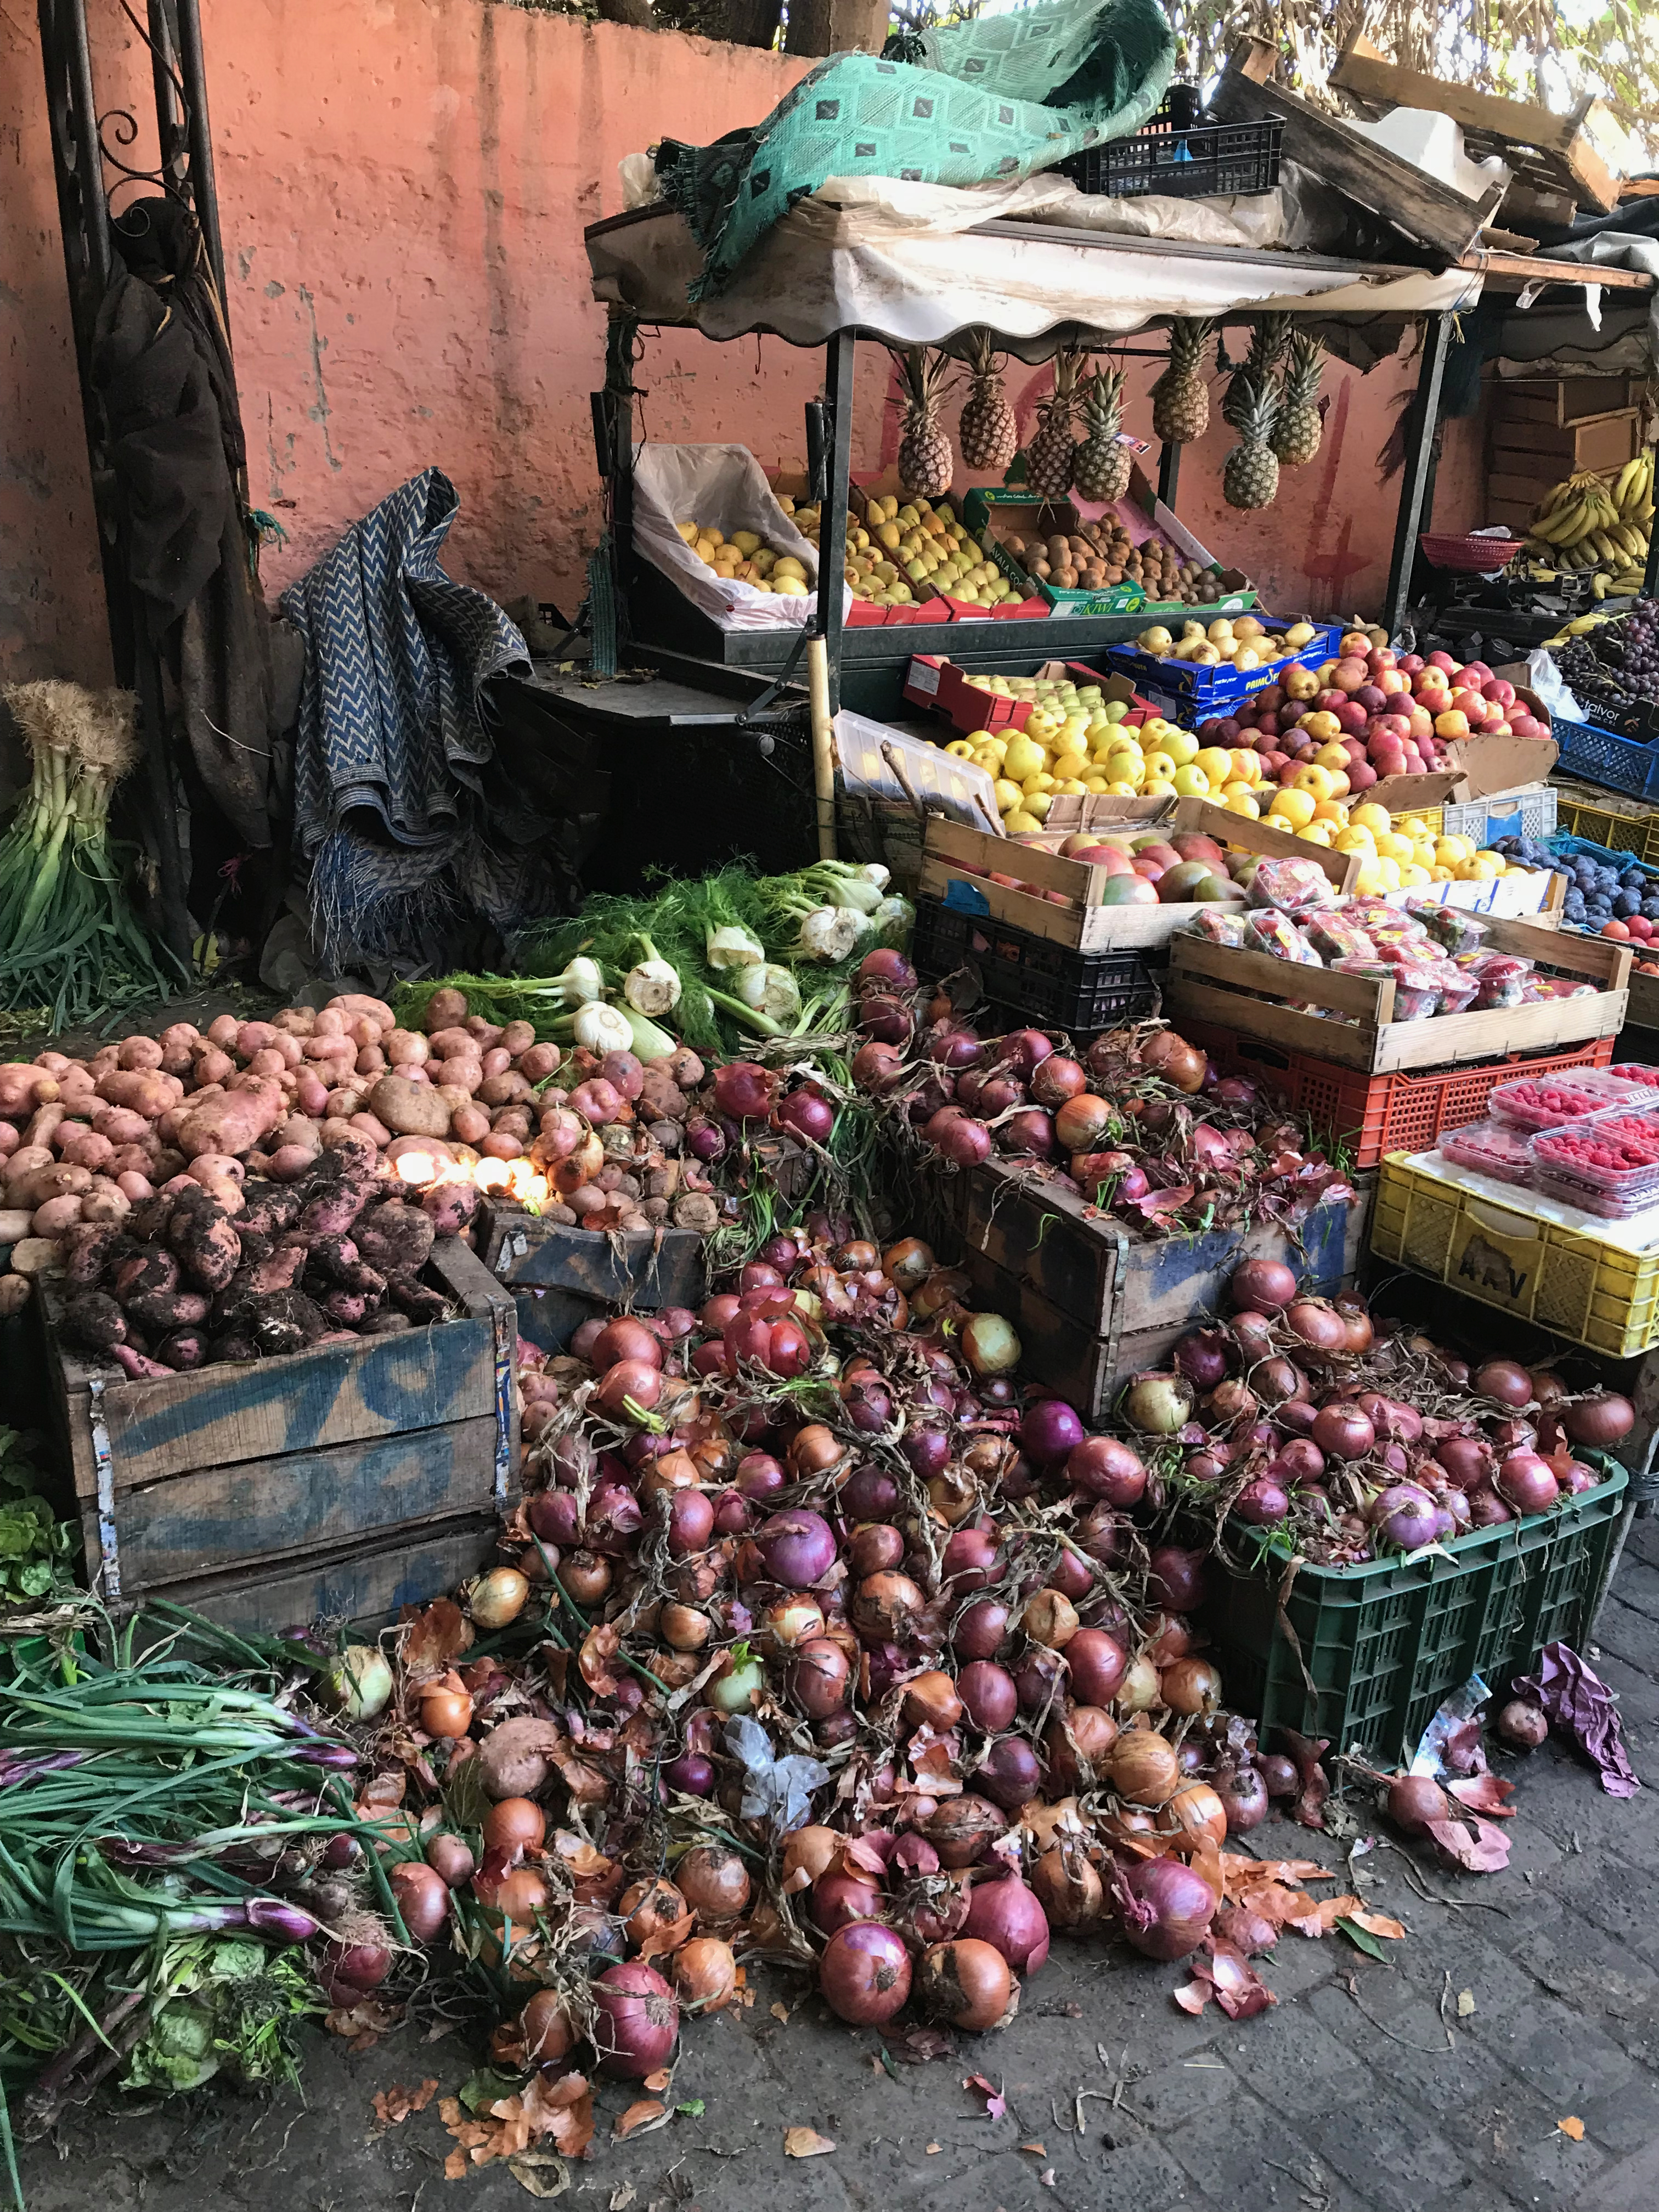 Vegetable stall in the Marrakech souk